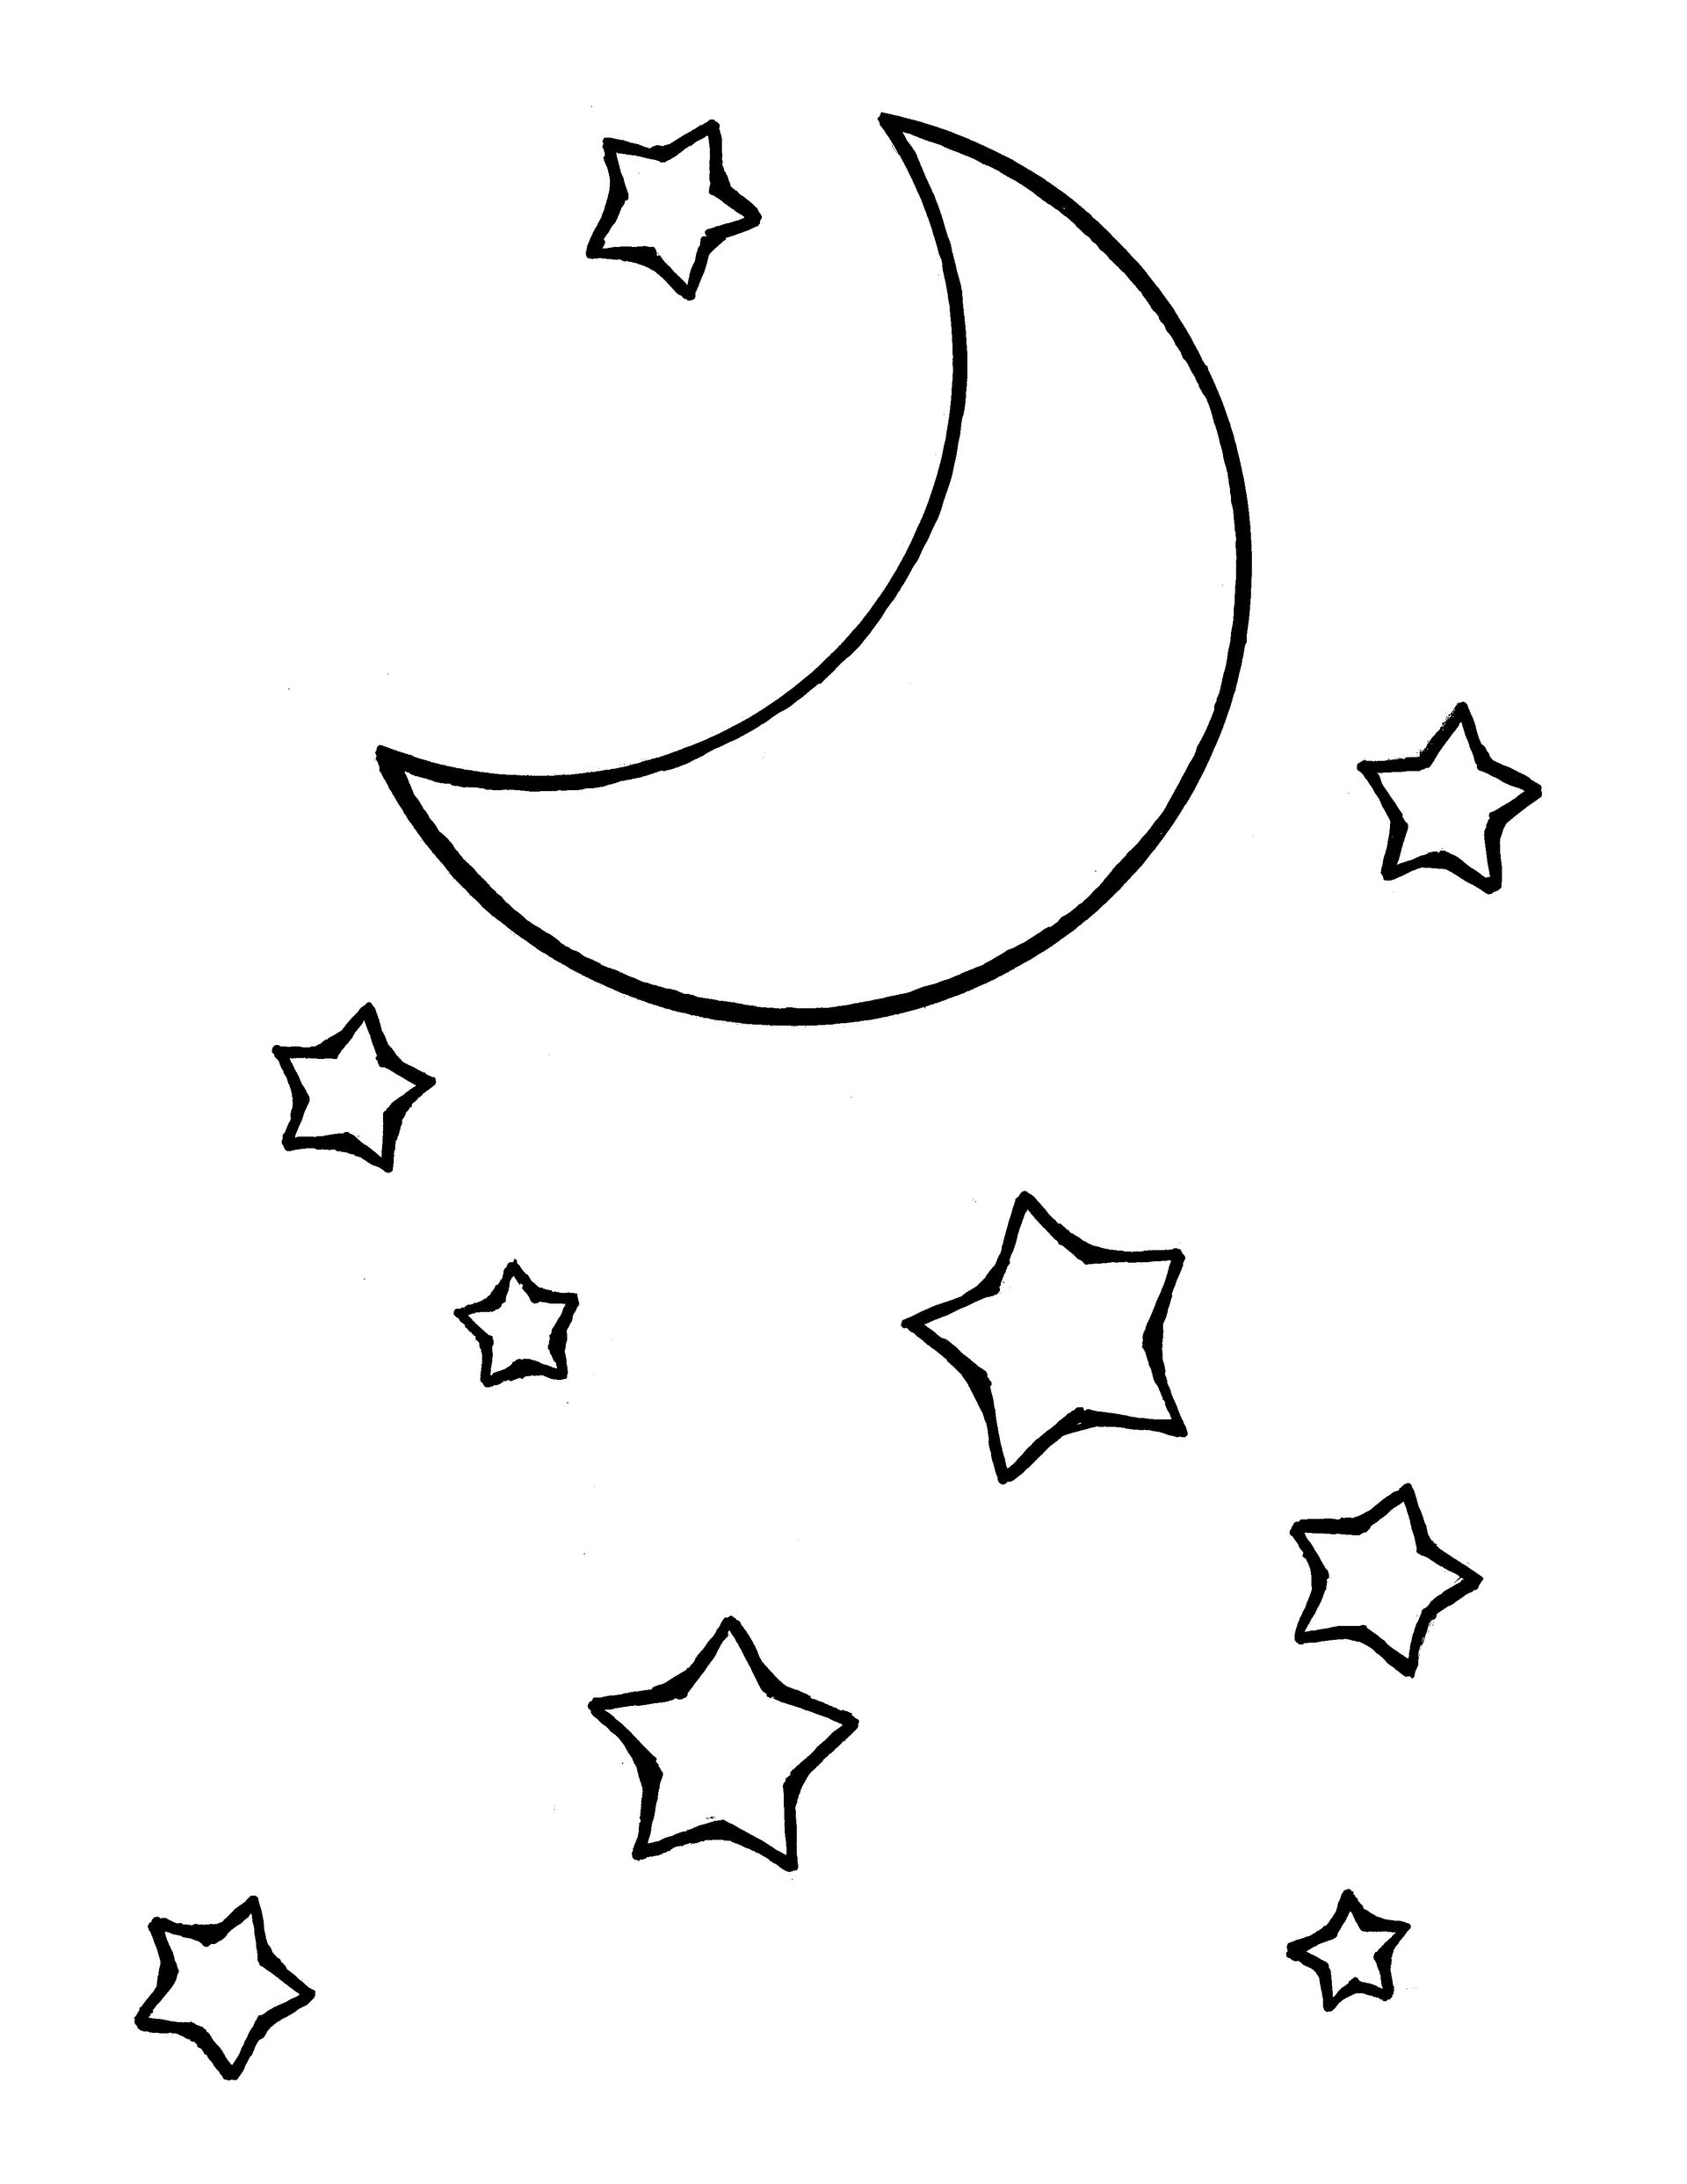 A line drawing of the moon and stars from the nursery manual Behold Your Little Ones (2008), page 35.